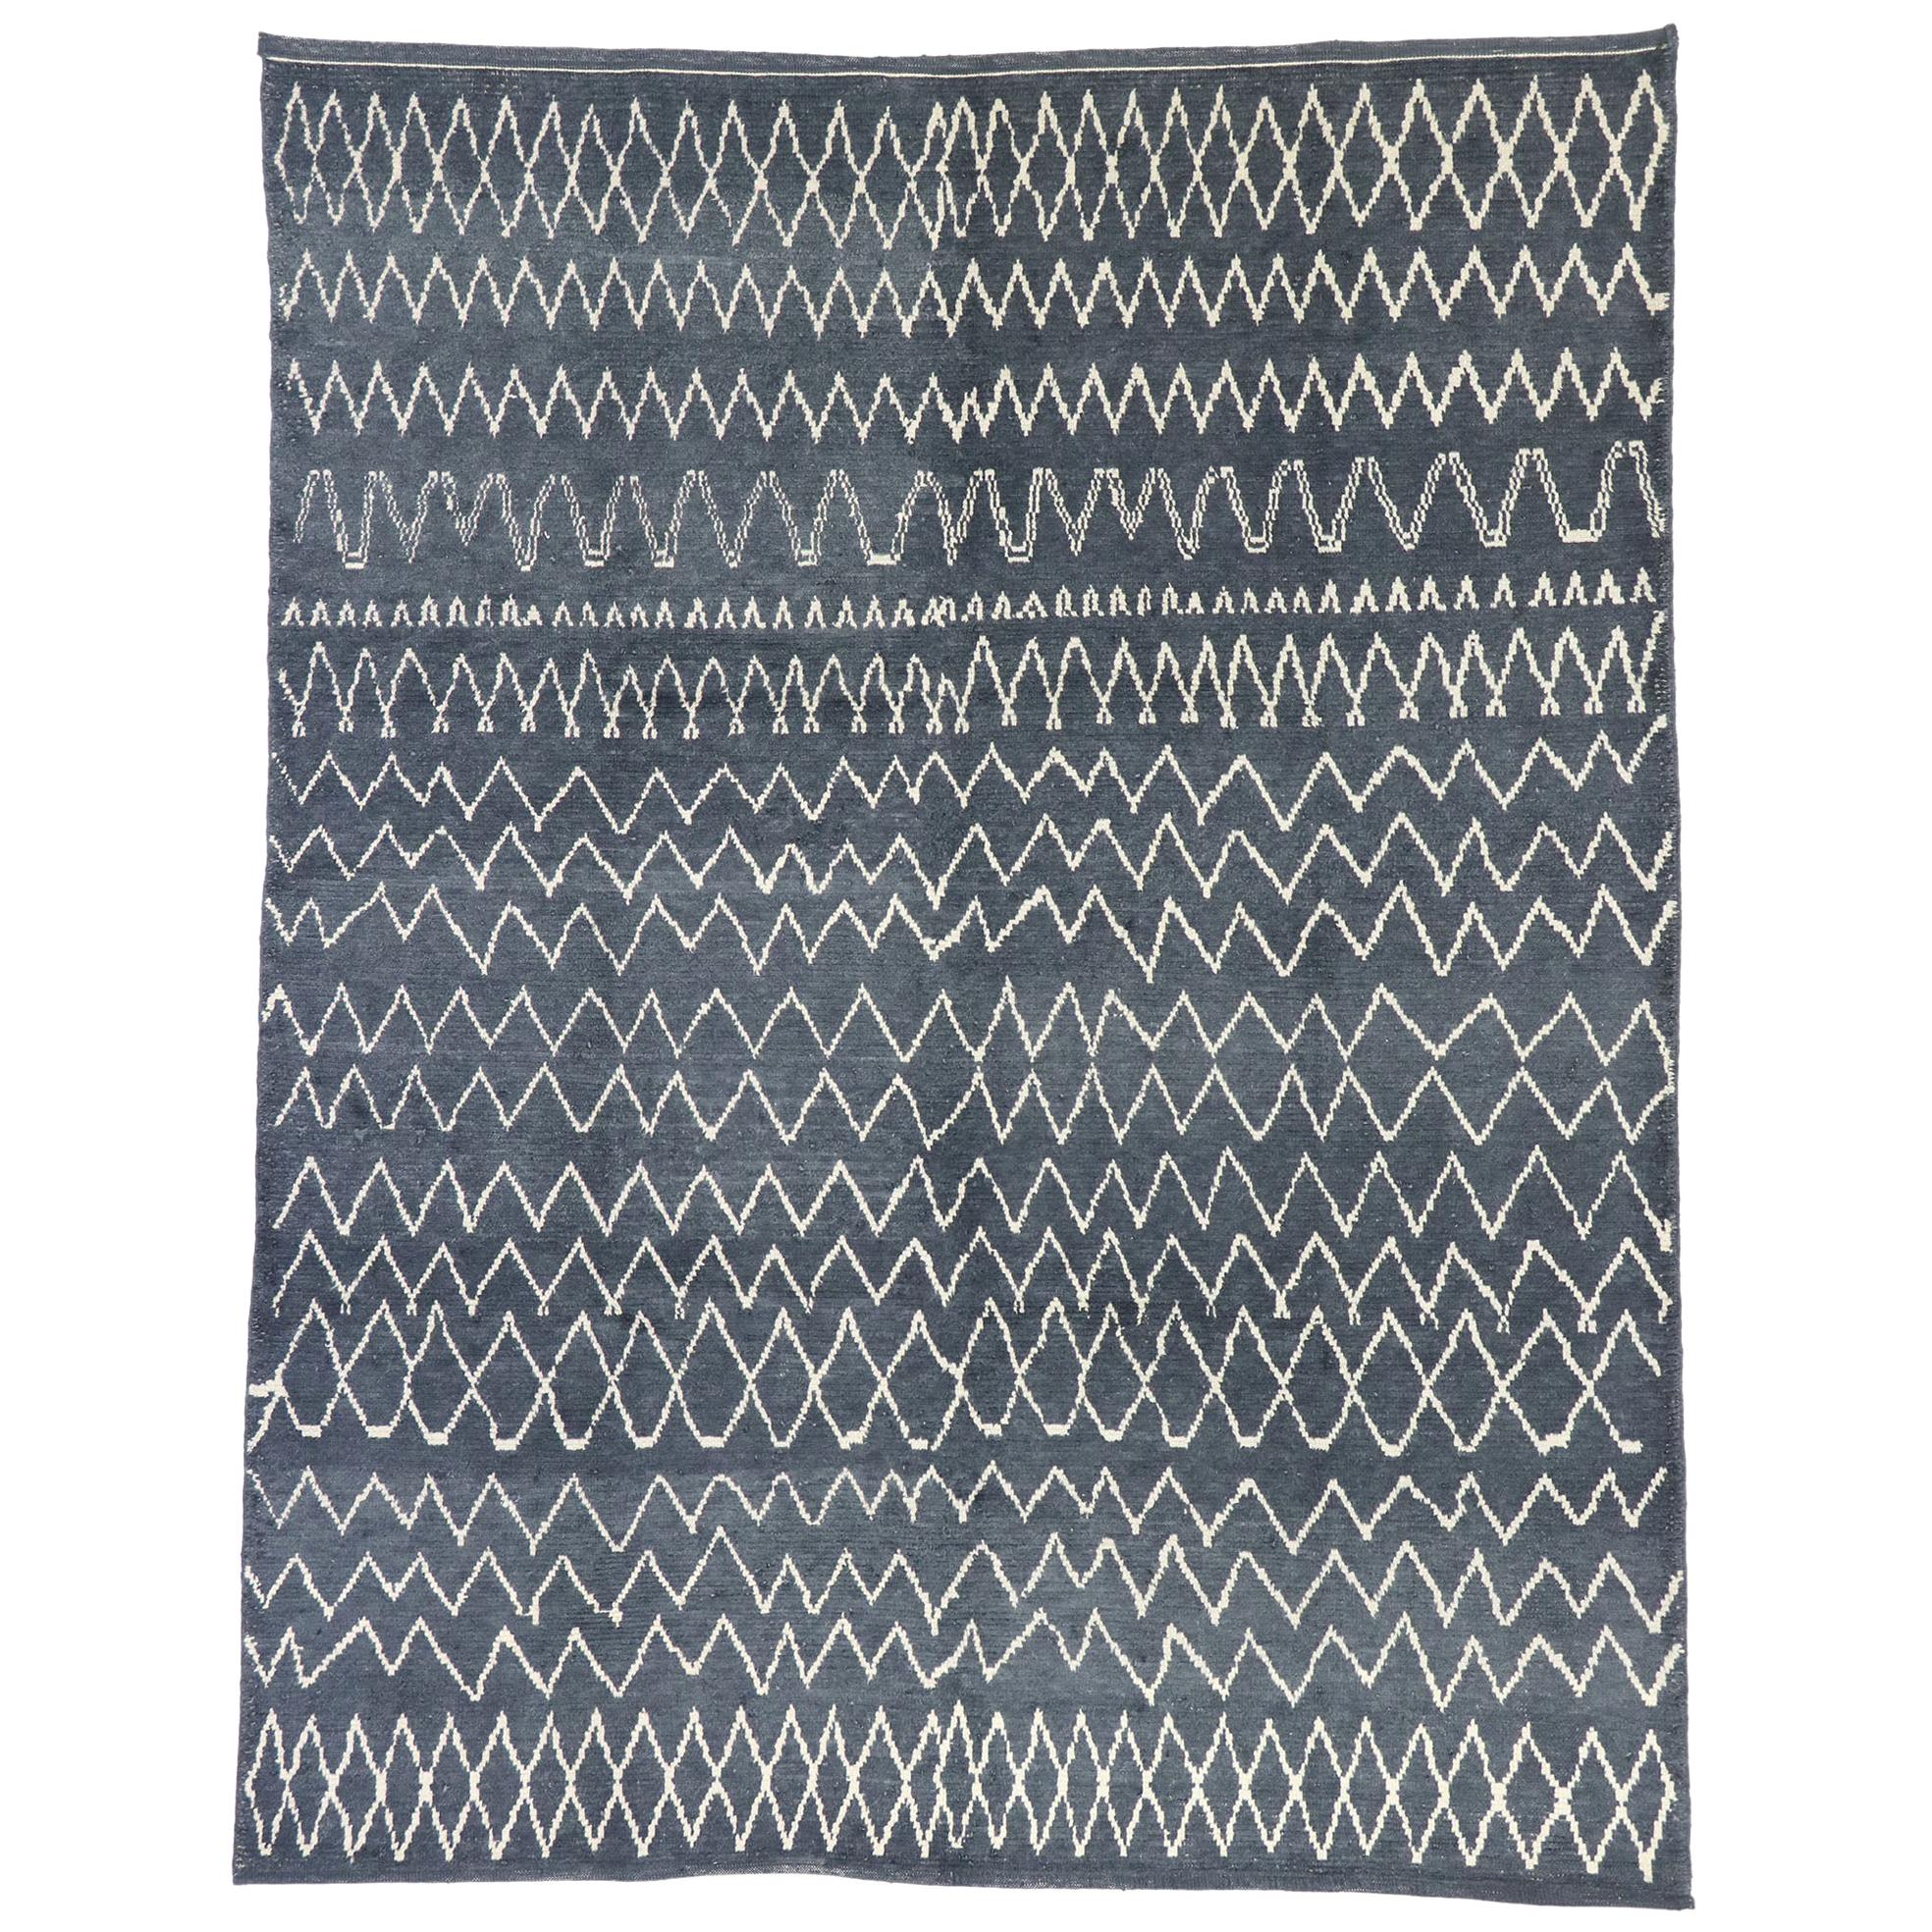 New Contemporary Moroccan Style Rug with Diamond Pattern and Chevron Design For Sale